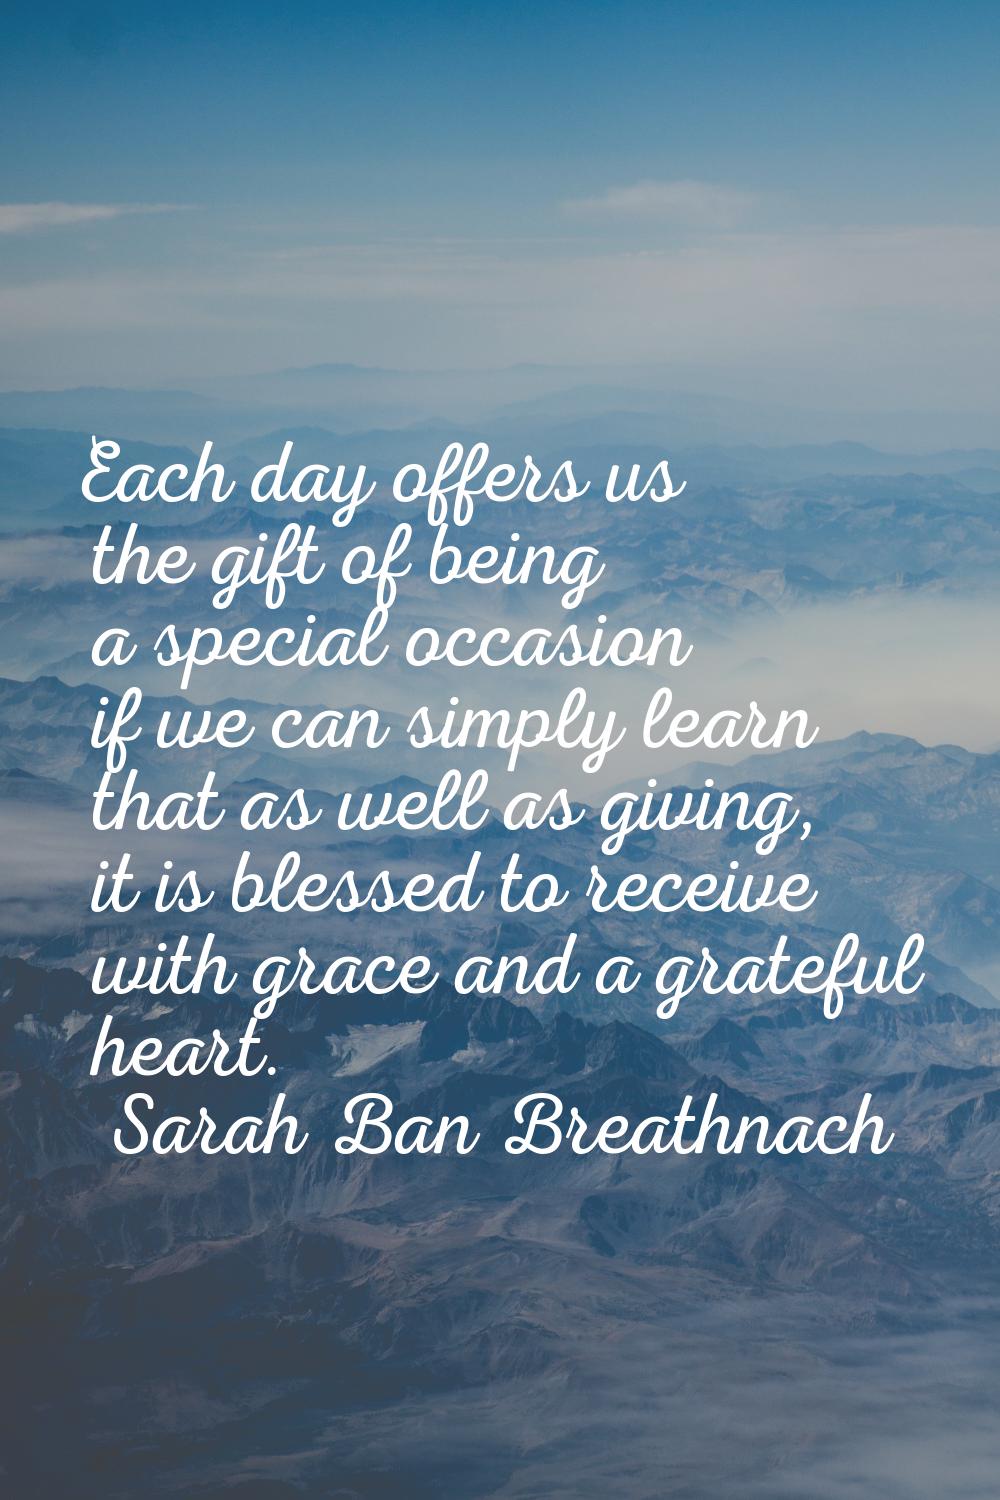 Each day offers us the gift of being a special occasion if we can simply learn that as well as givi